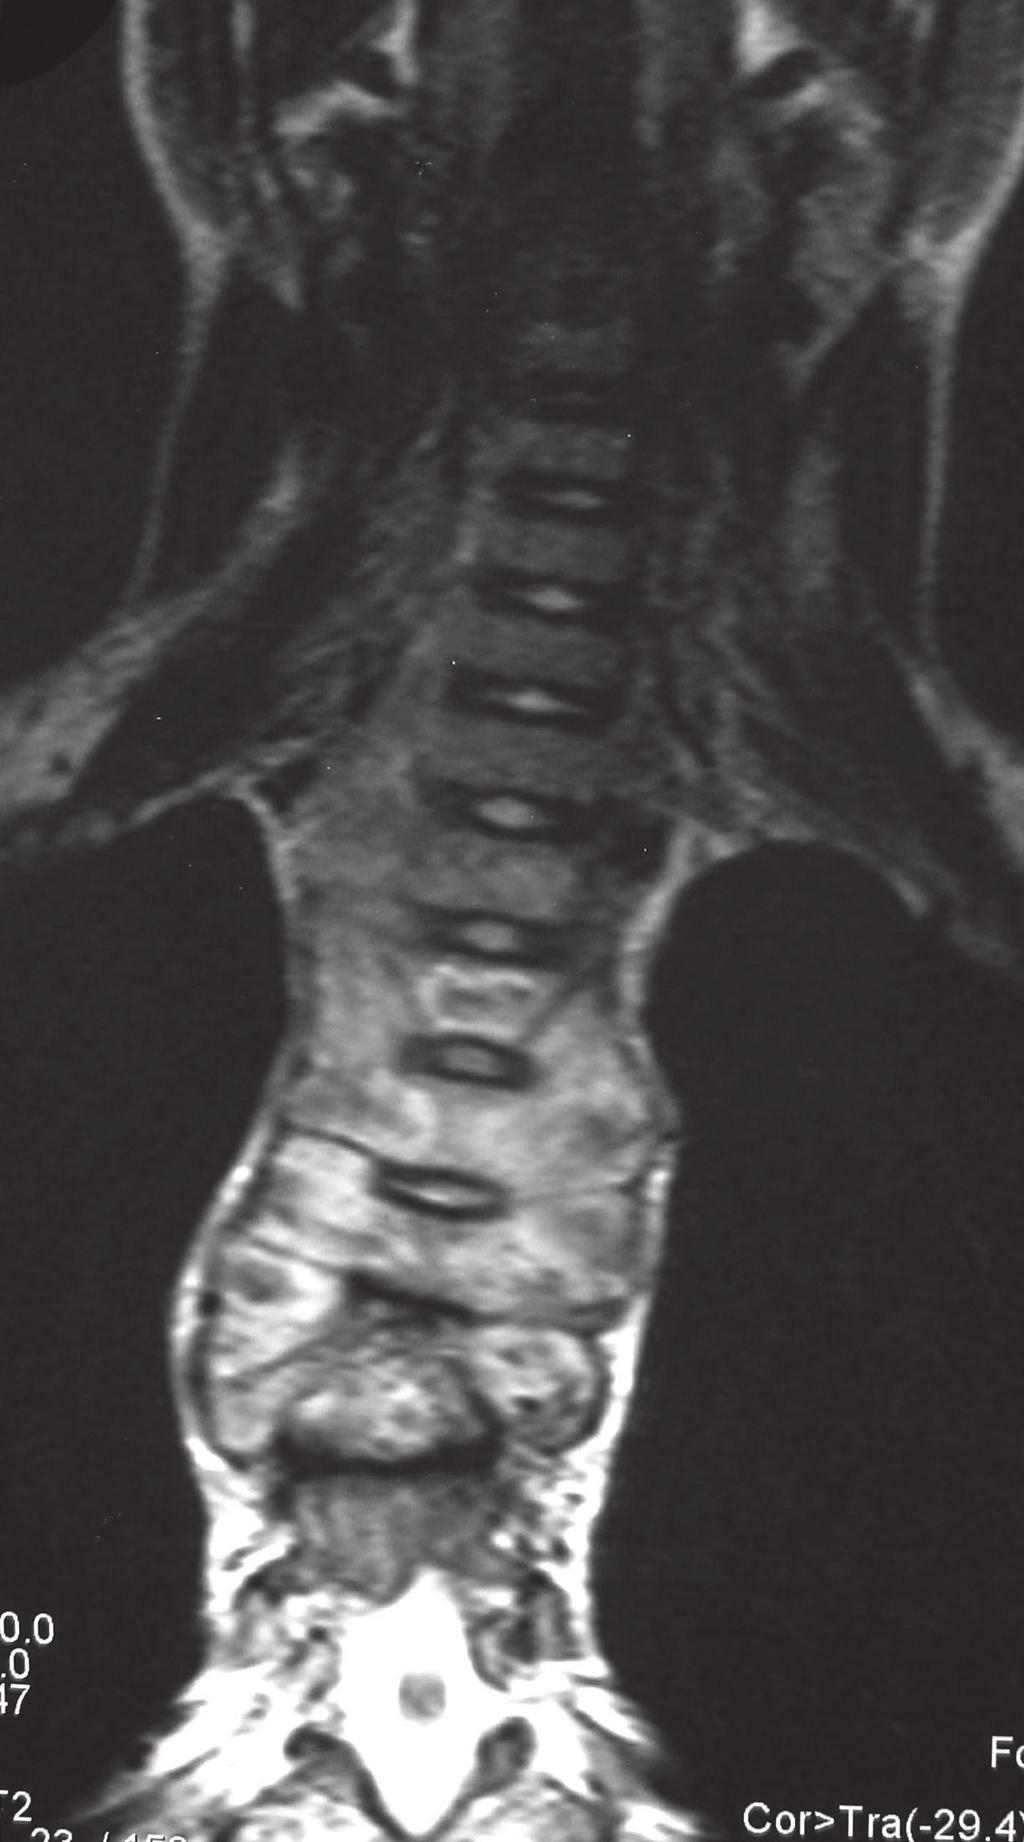 There is a predominantly anterior ring-enhancing soft-tissue mass but the smaller posterior extradural component causes spinal cord compression.